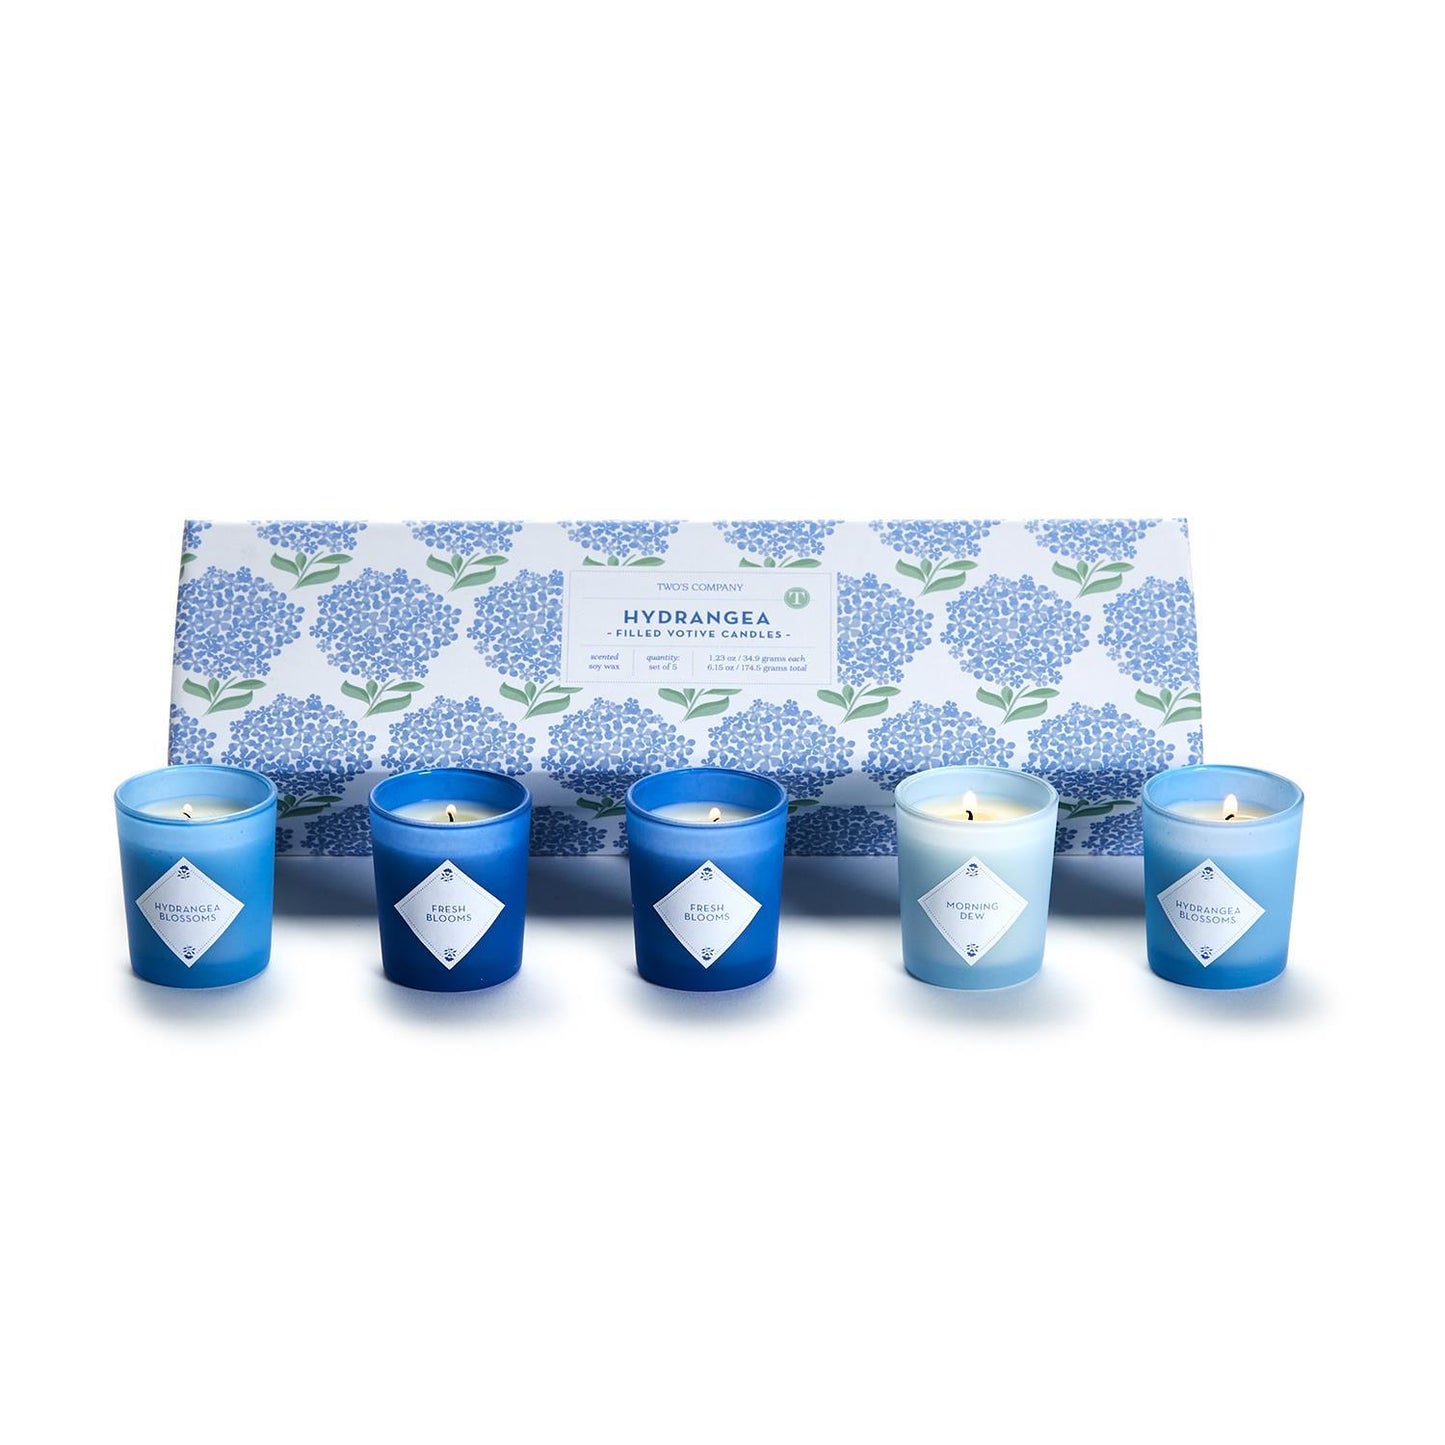 Hydrangea Scented Candles Gift Box (Set of 5)